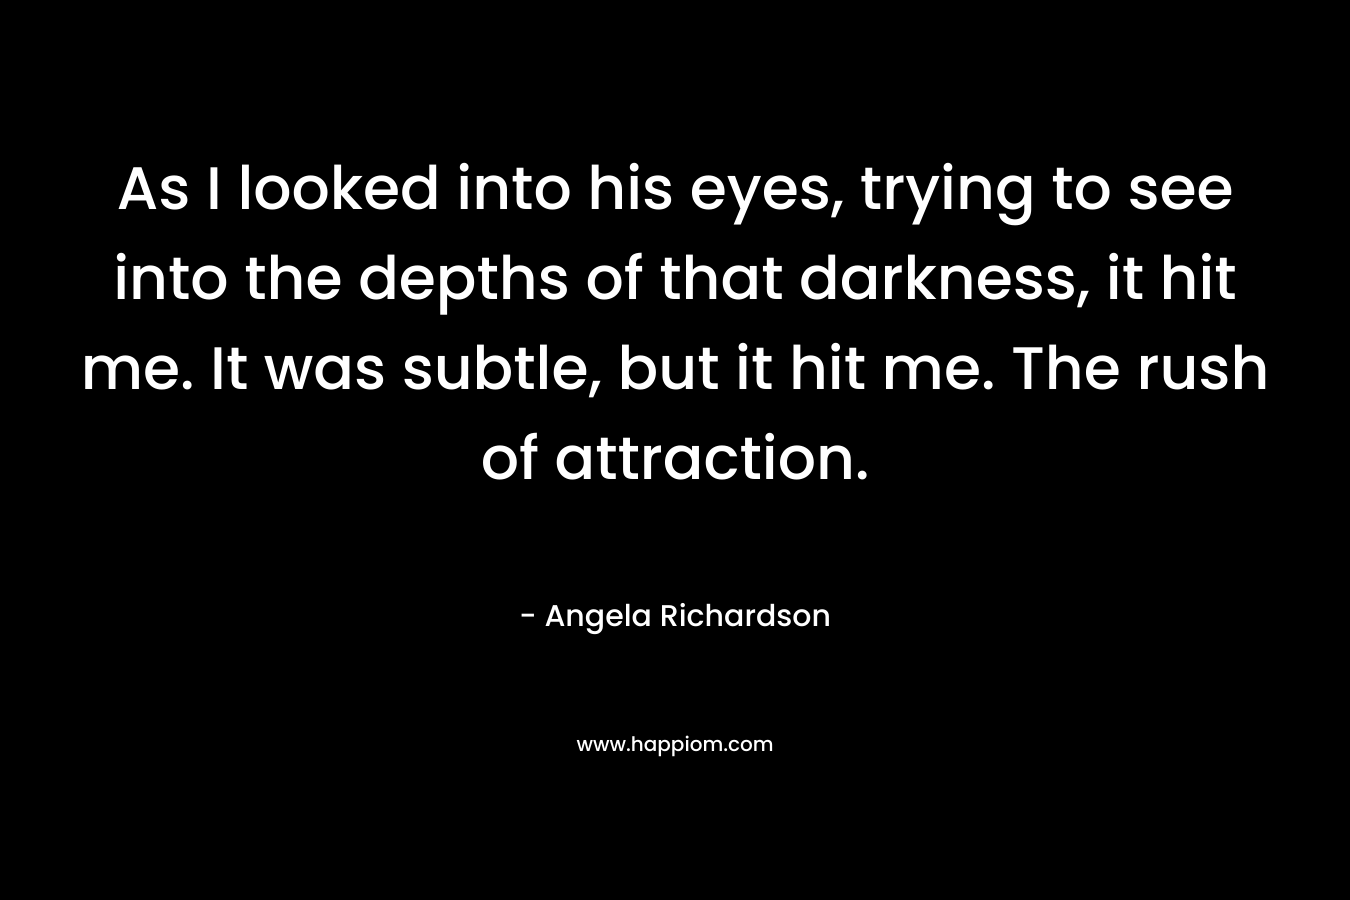 As I looked into his eyes, trying to see into the depths of that darkness, it hit me. It was subtle, but it hit me. The rush of attraction. – Angela Richardson